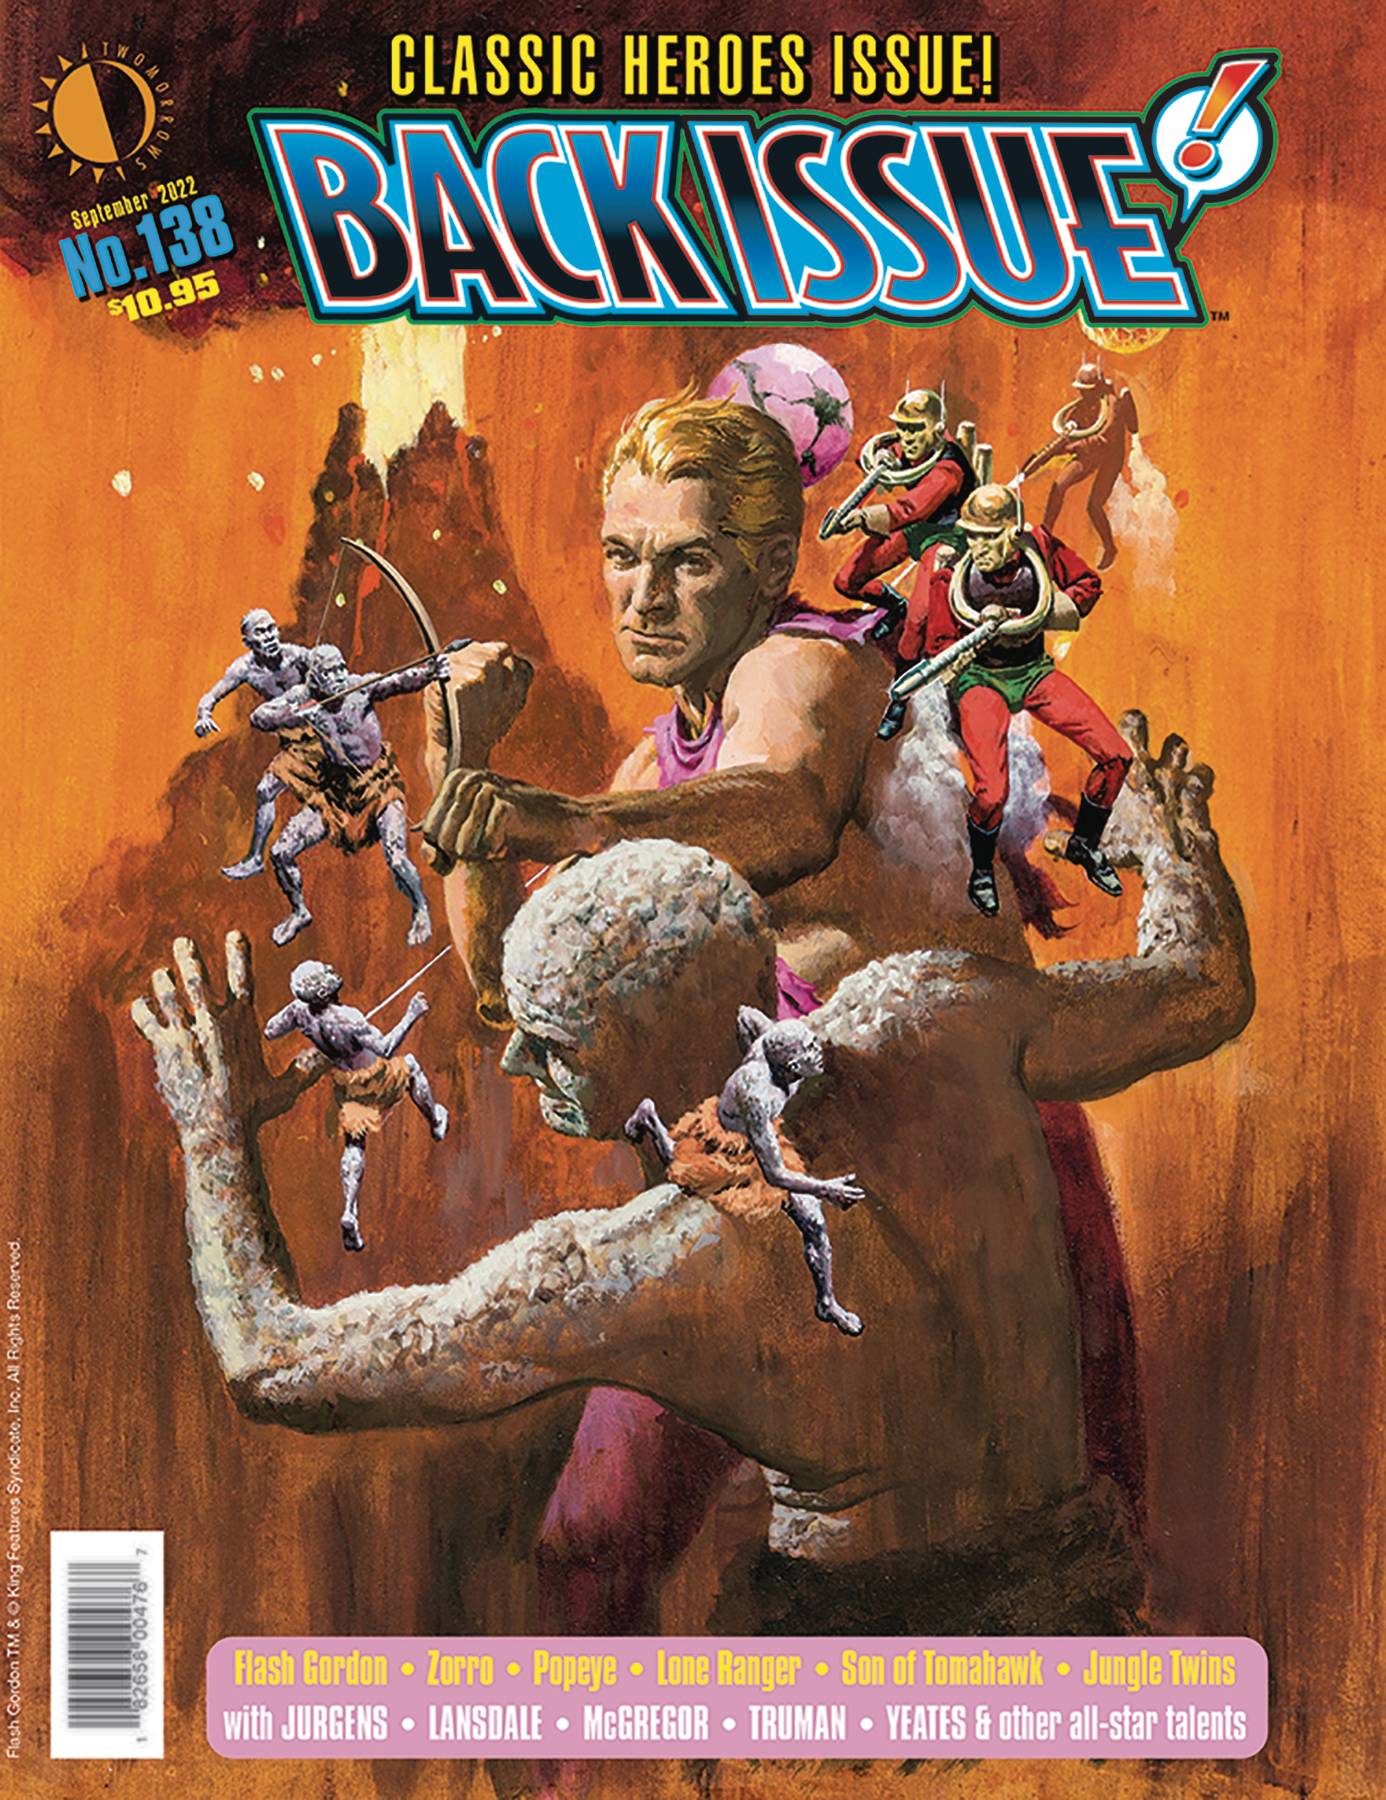 BACK ISSUE #138